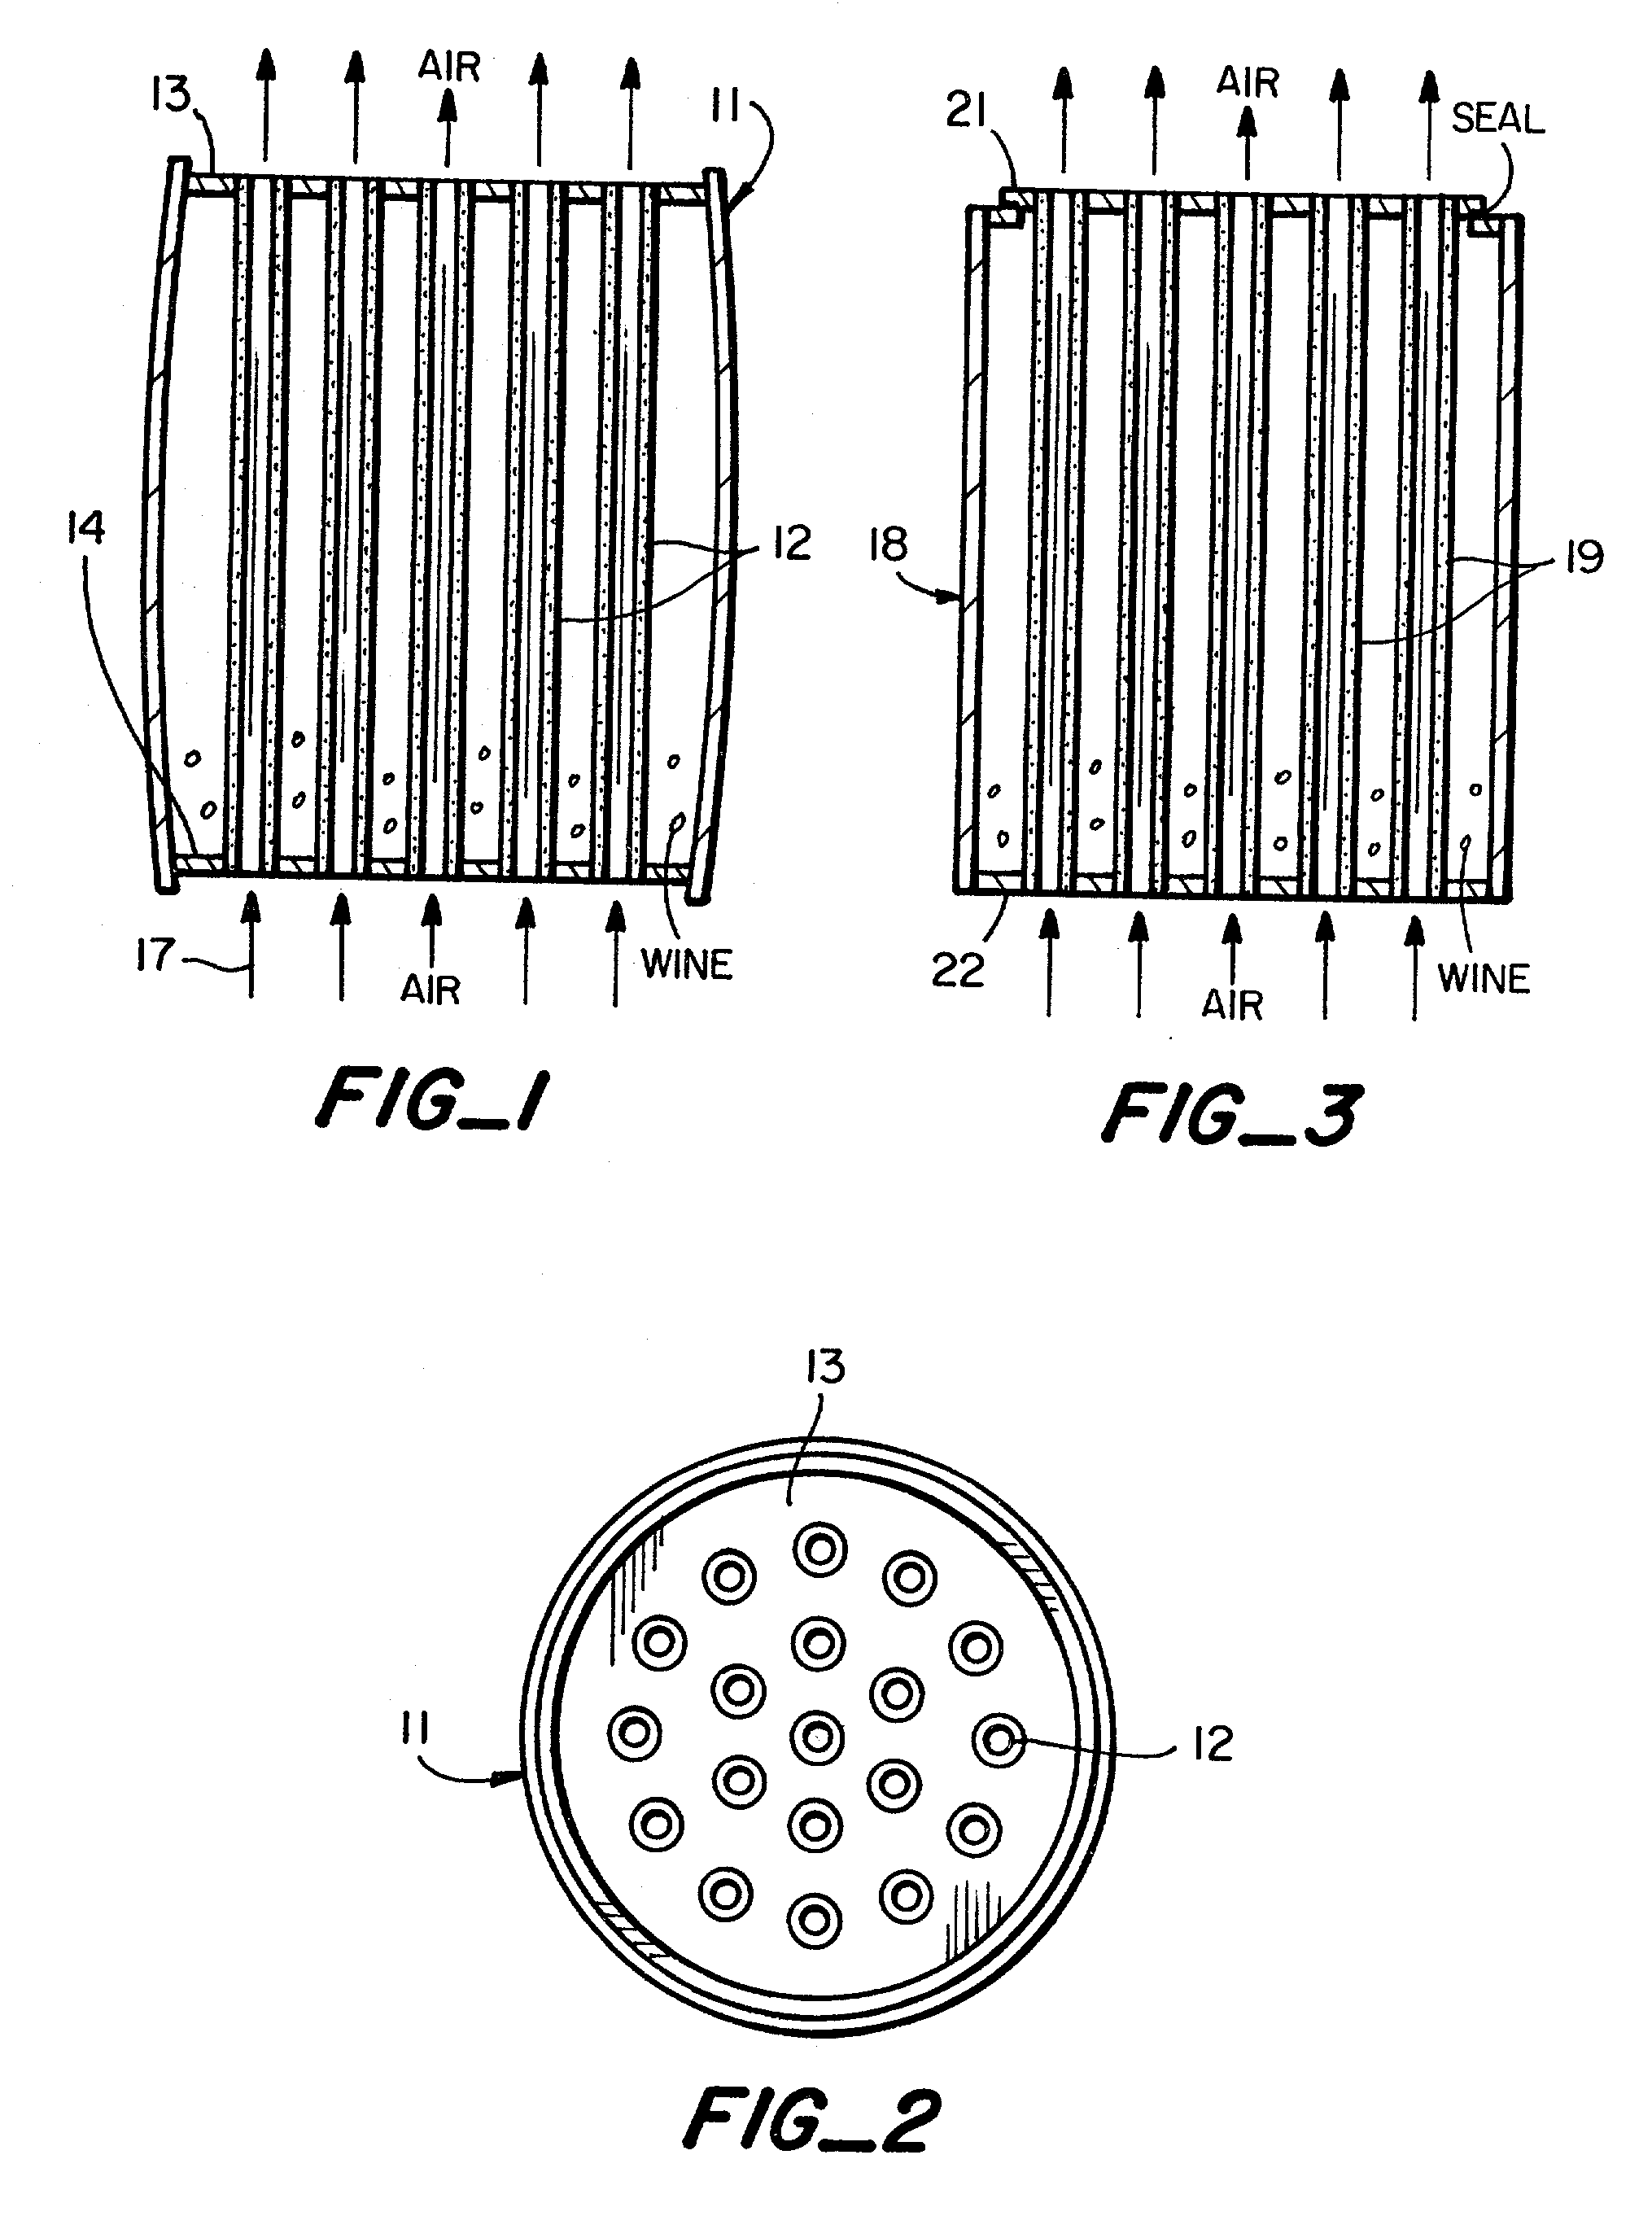 Apparatus and method for aging wine or spirits